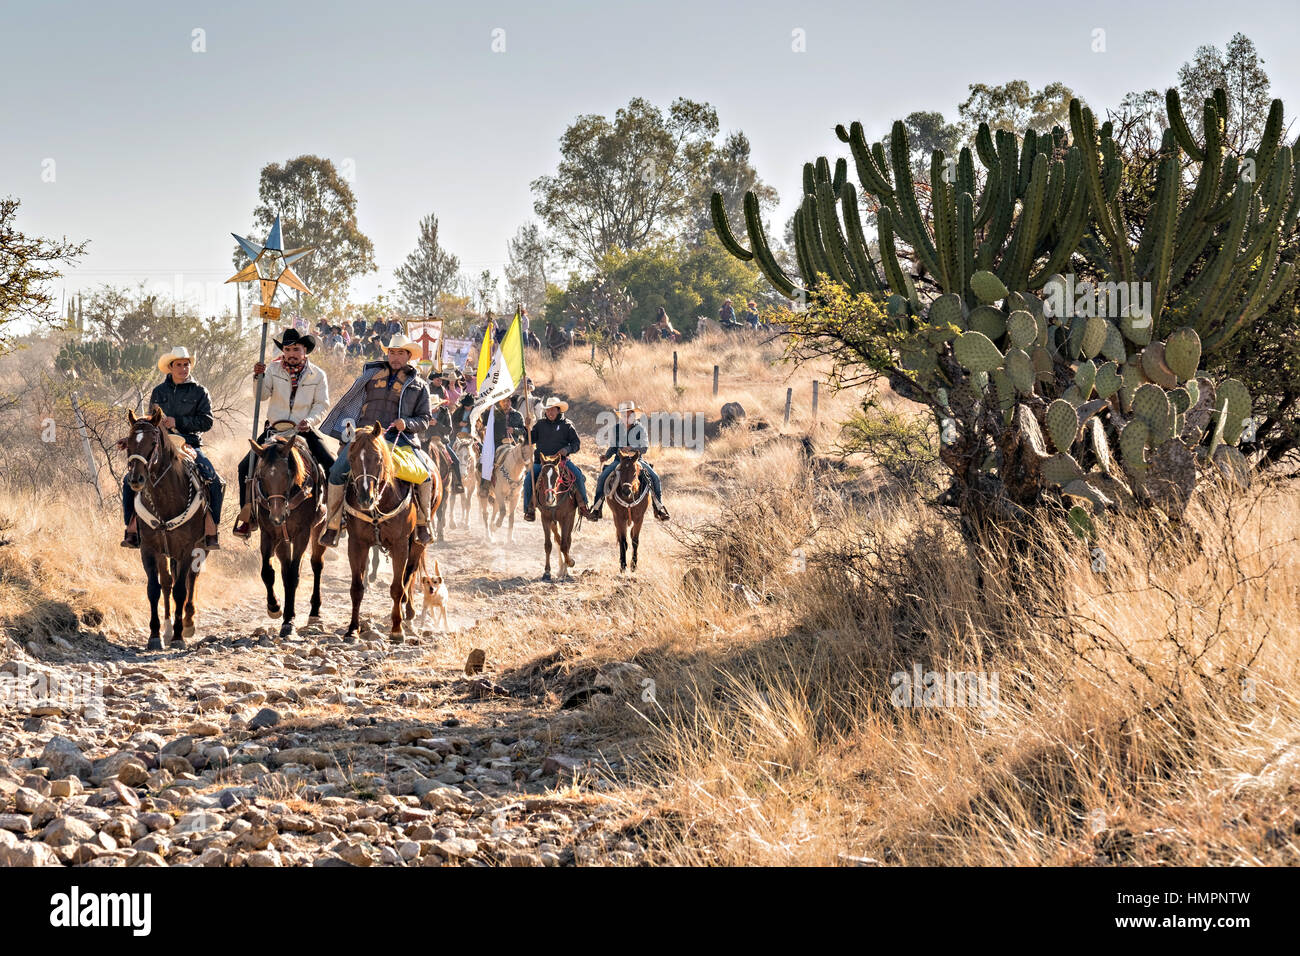 Hundreds of Mexican cowboys ride through the high desert during the annual Cabalgata de Cristo Rey pilgrimage January 5, 2017 in La Trinidad, Guanajuato, Mexico. Thousands of Mexican cowboys and horse take part in the three-day ride to the mountaintop shrine of Cristo Rey stopping along the way at shrines and churches. Stock Photo